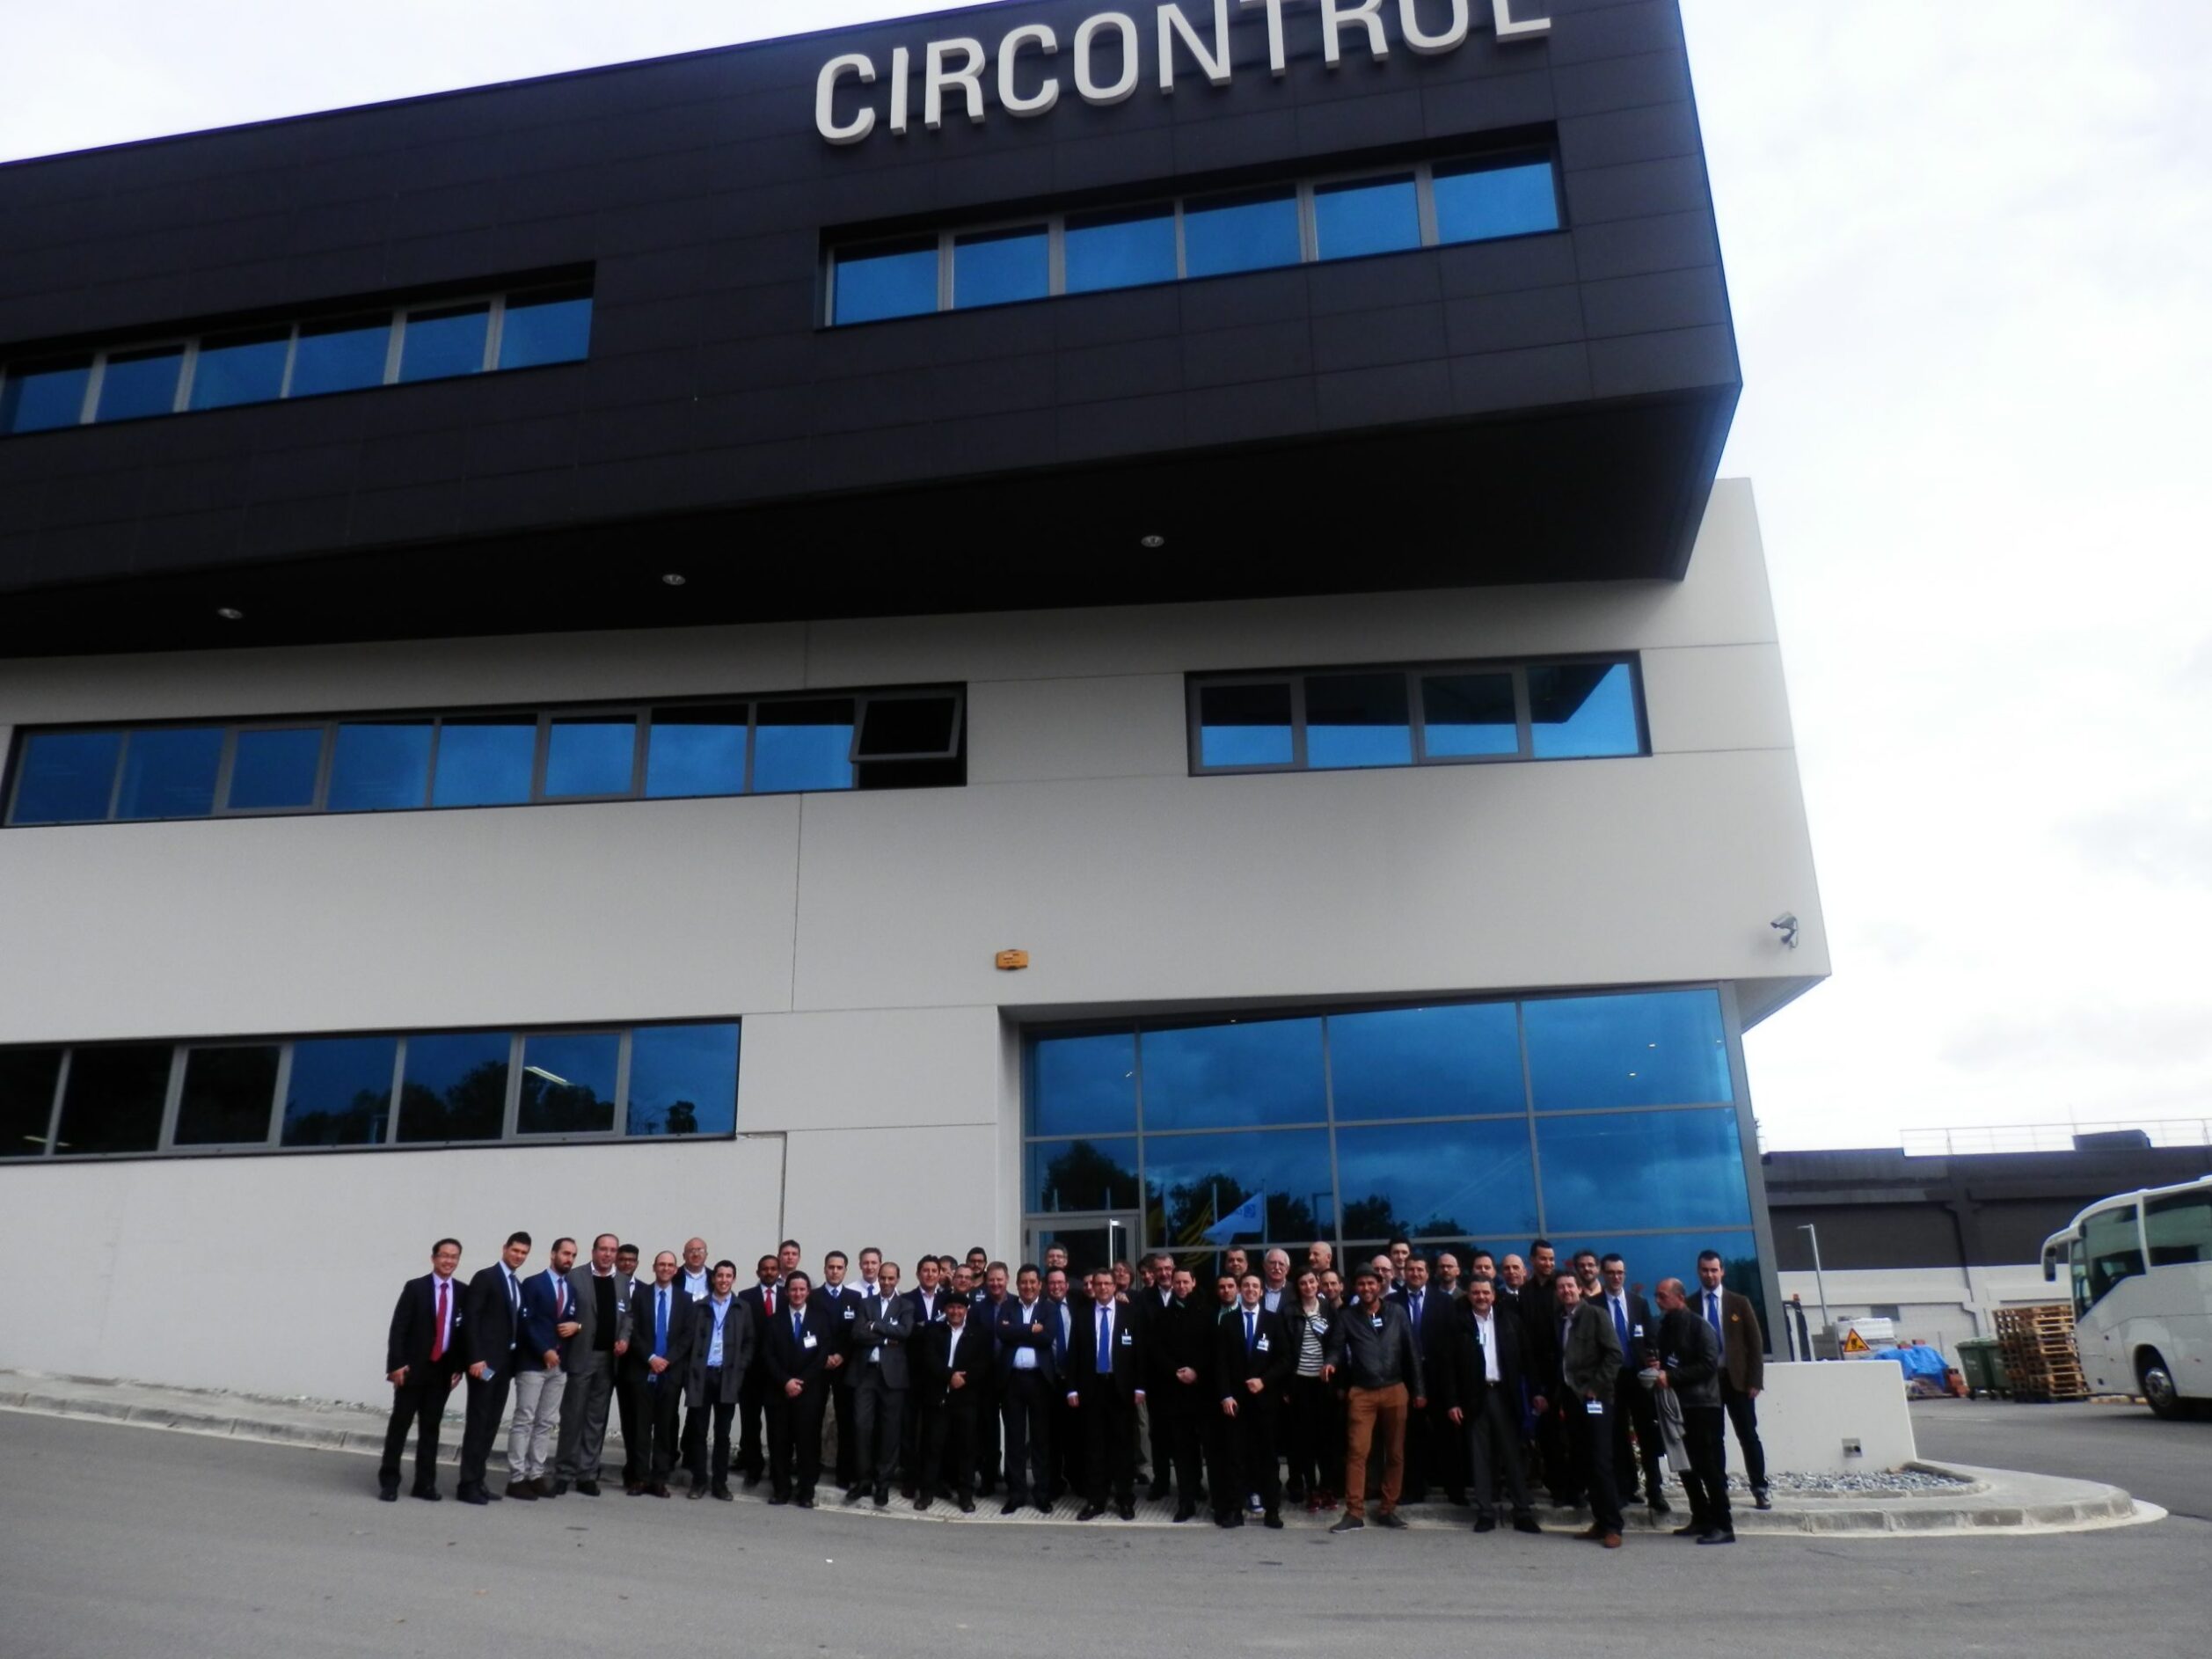 Future of efficient car parking and the electric vehicle - Experts meet at Circontrol